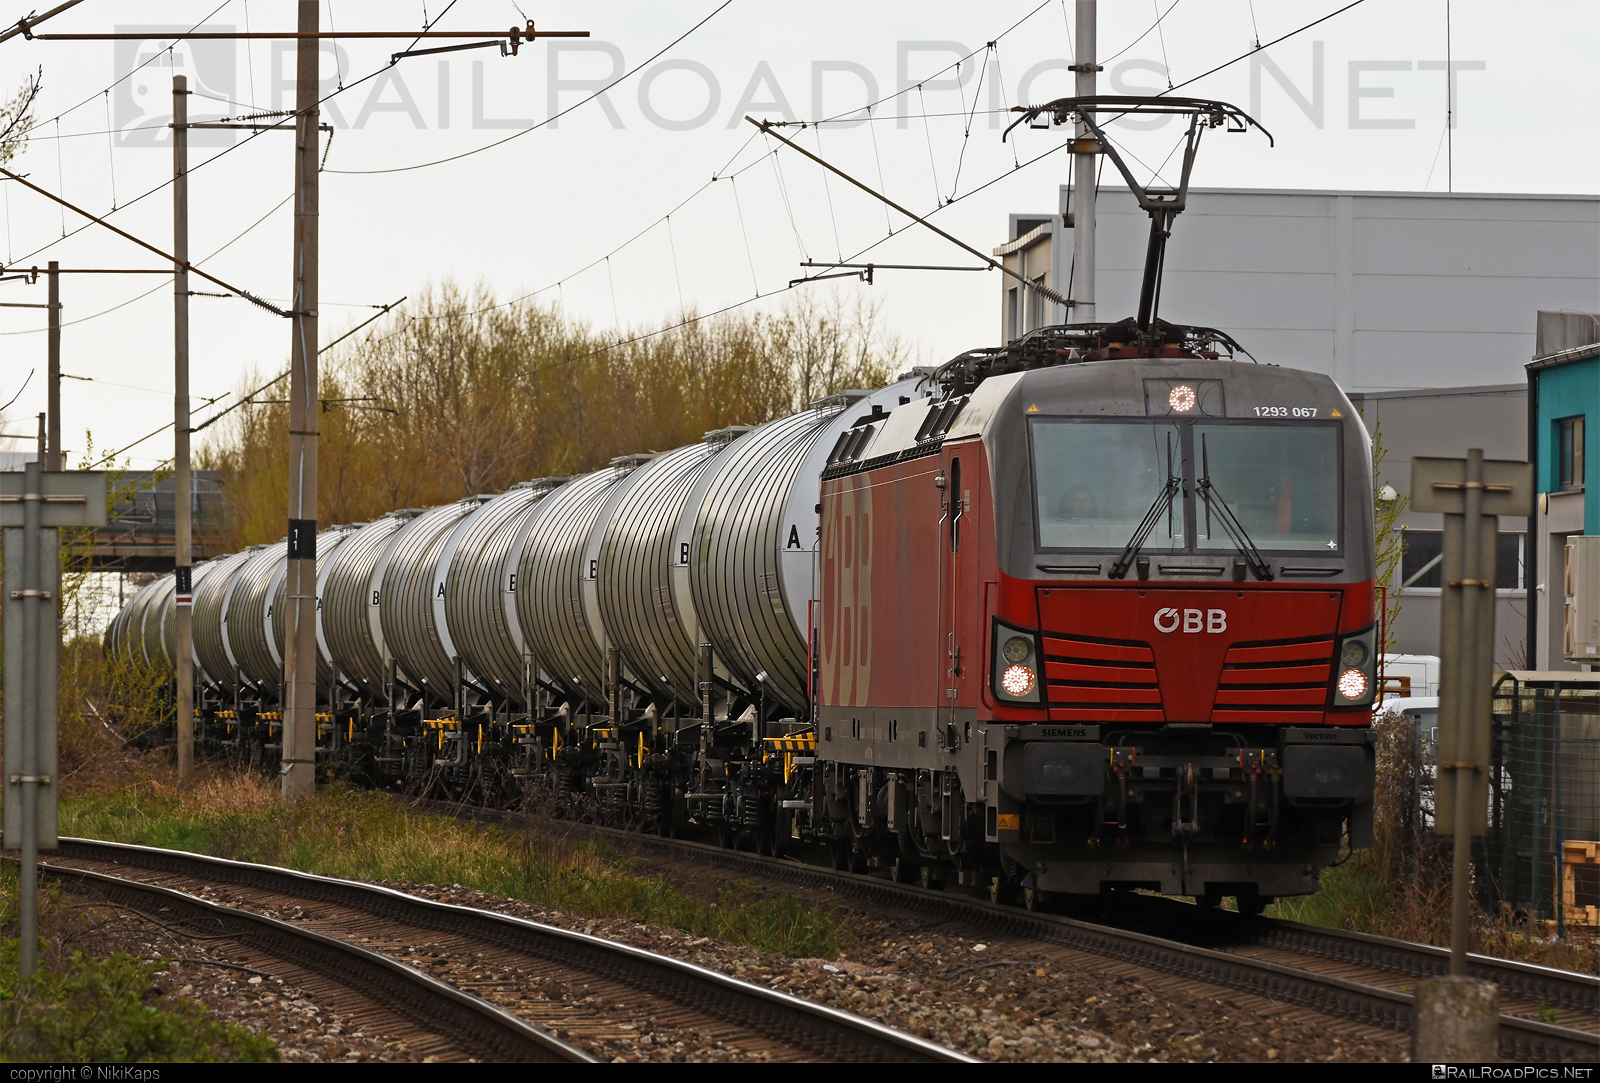 Siemens Vectron MS - 1293 067 operated by Rail Cargo Austria AG #kesselwagen #obb #osterreichischebundesbahnen #rcw #siemens #siemensVectron #siemensVectronMS #tankwagon #vectron #vectronMS